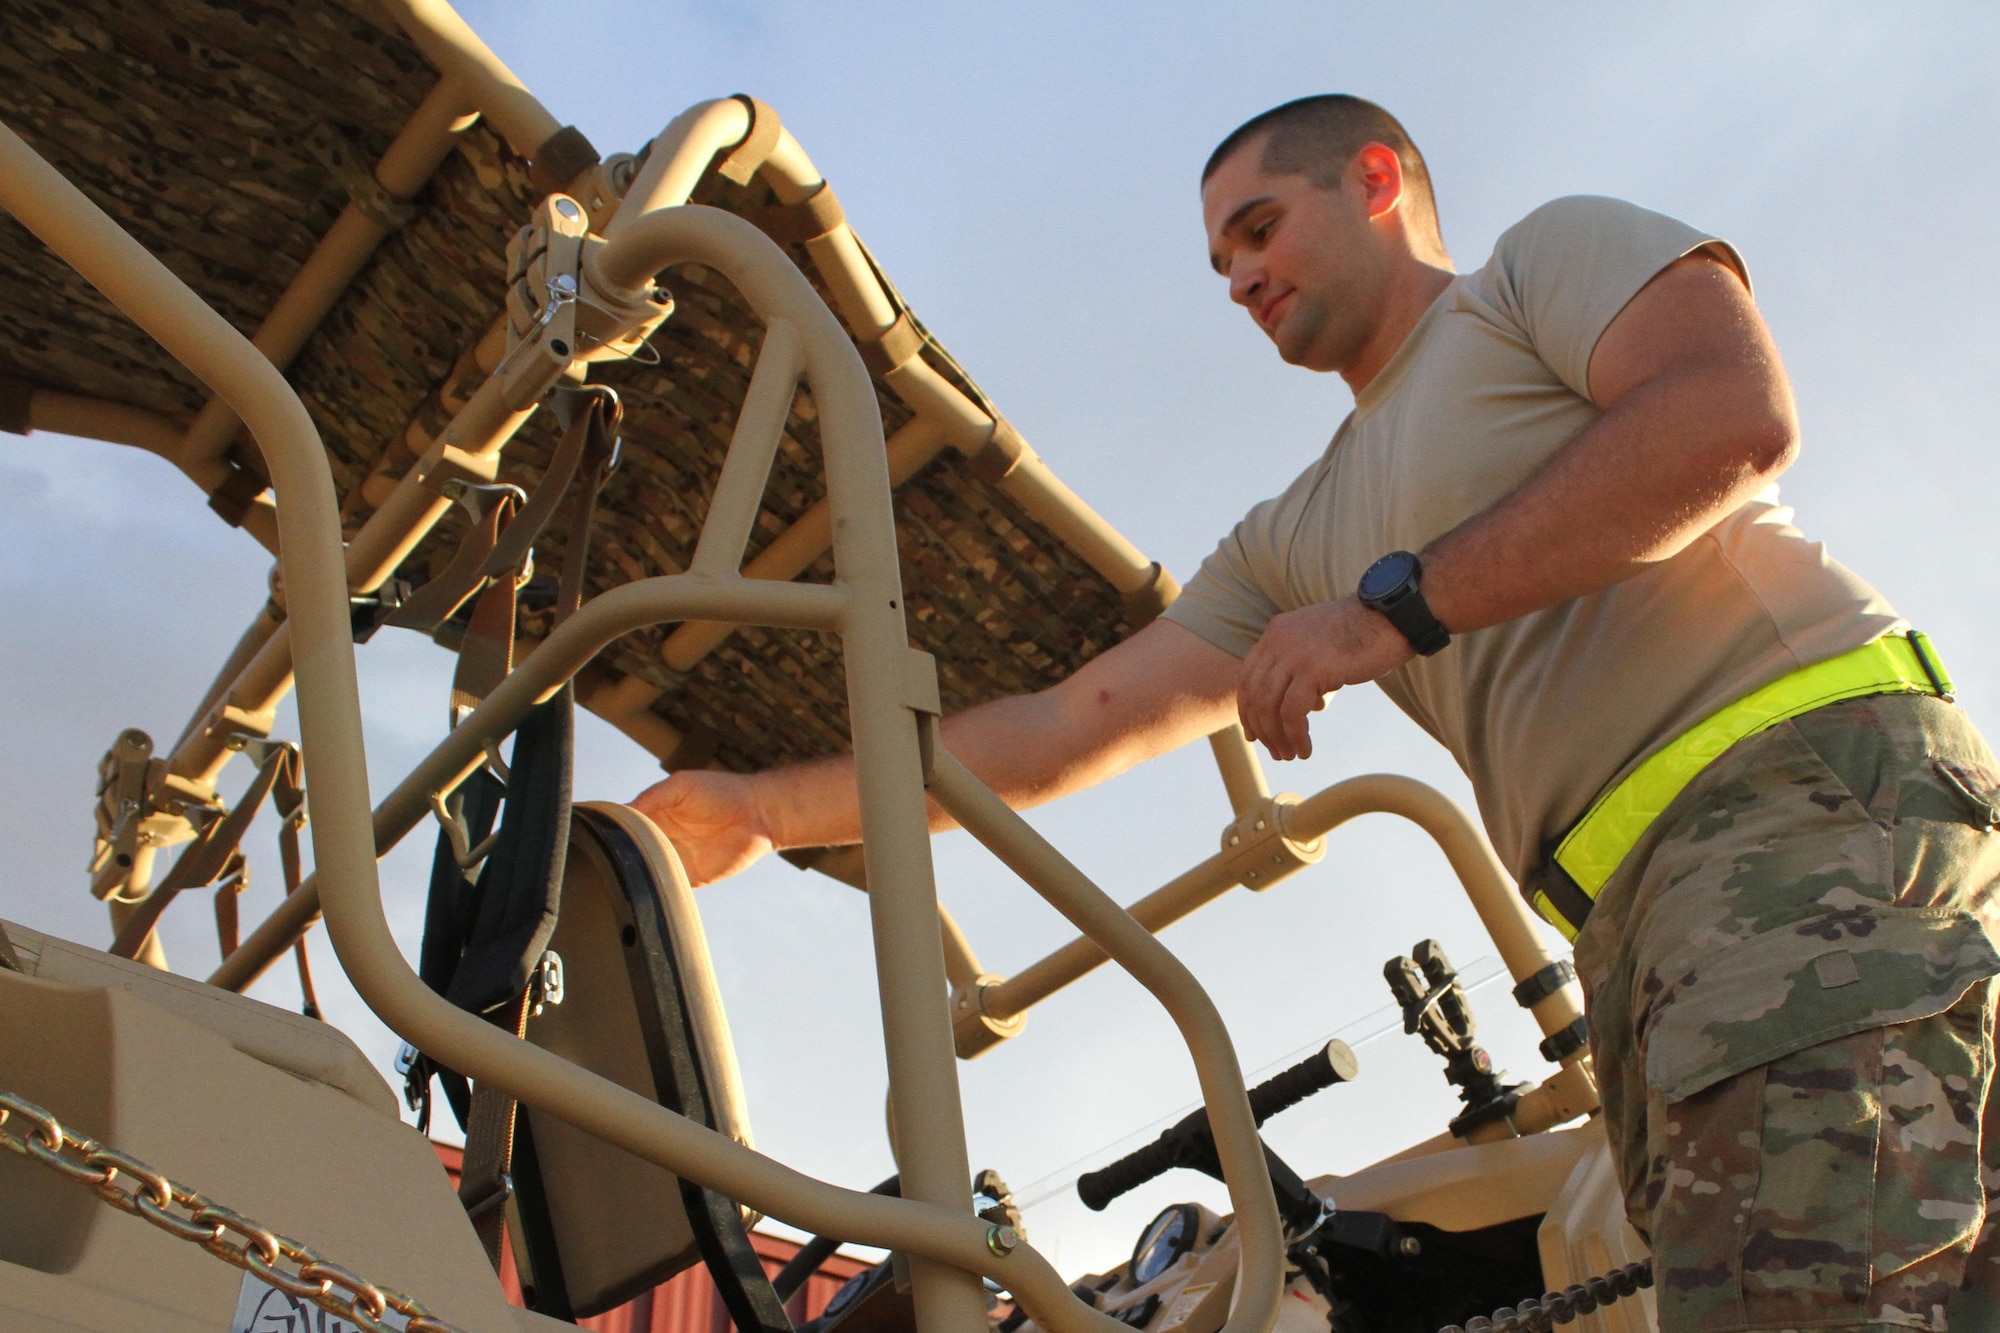 Senior Airman Brian Jackson, Air Force Security Forces Center Desert Defender Ground Combat Readiness Training Center's Logistics Detail team member, checks to make sure an MRZR off-road utility vehicle is ready for shipment.